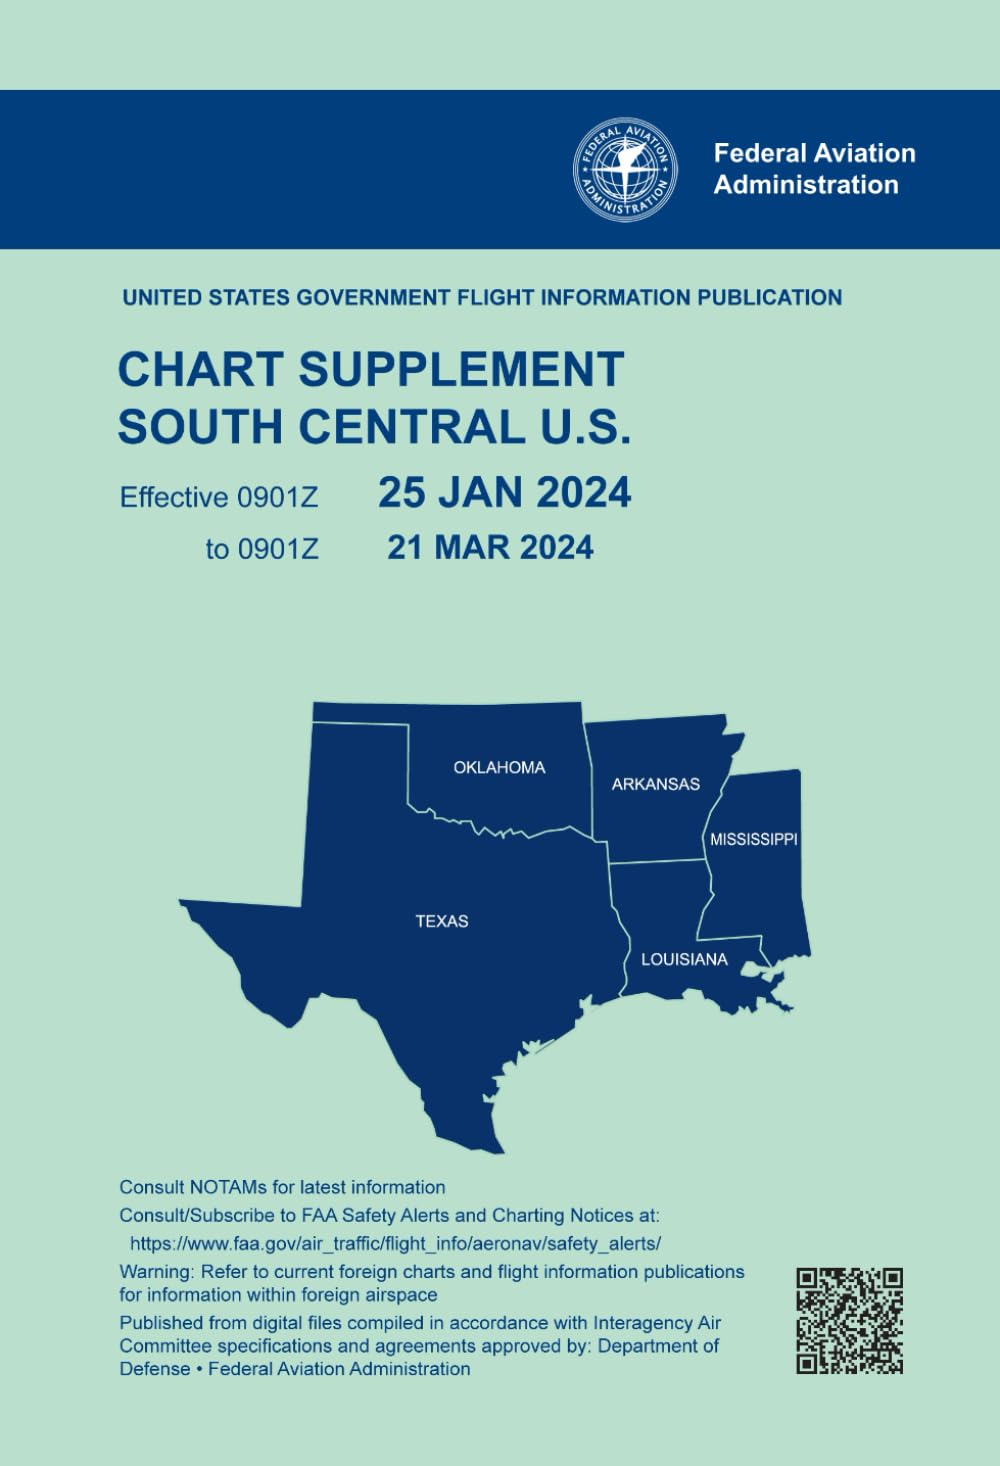 Chart Supplement South Central U.S.